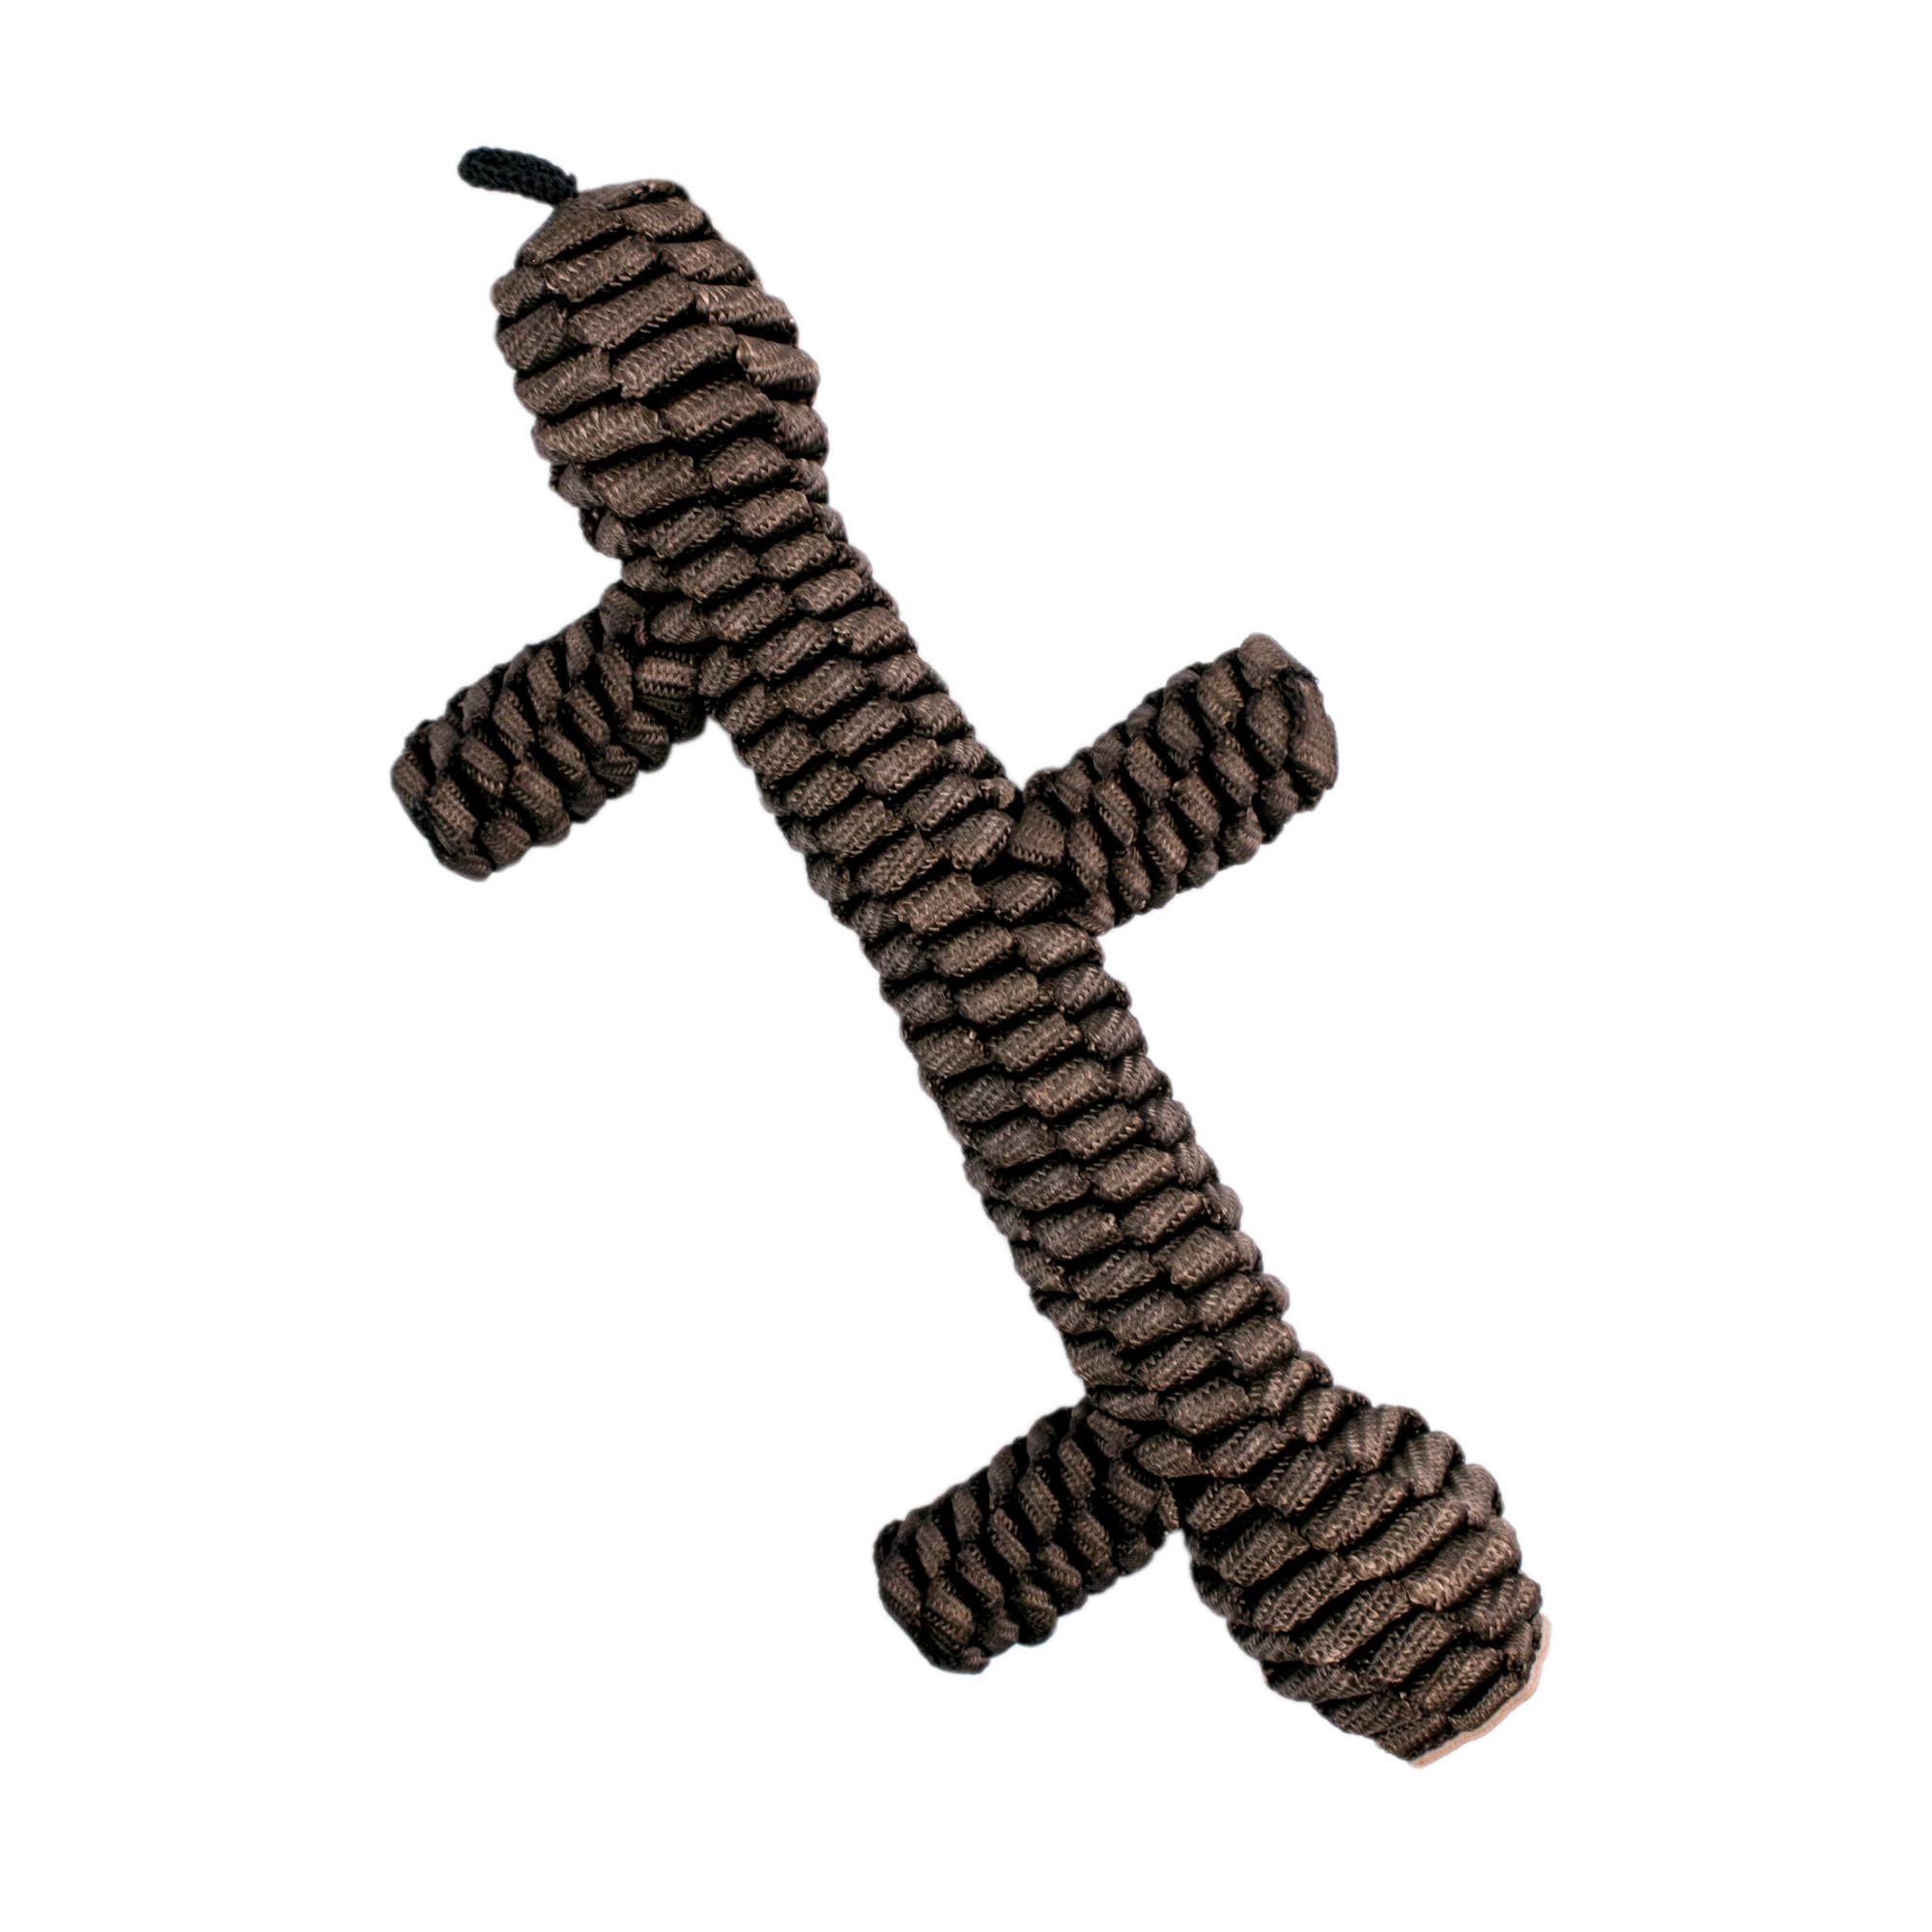 Tall Tails - 9" Brown Braided Stick Toy